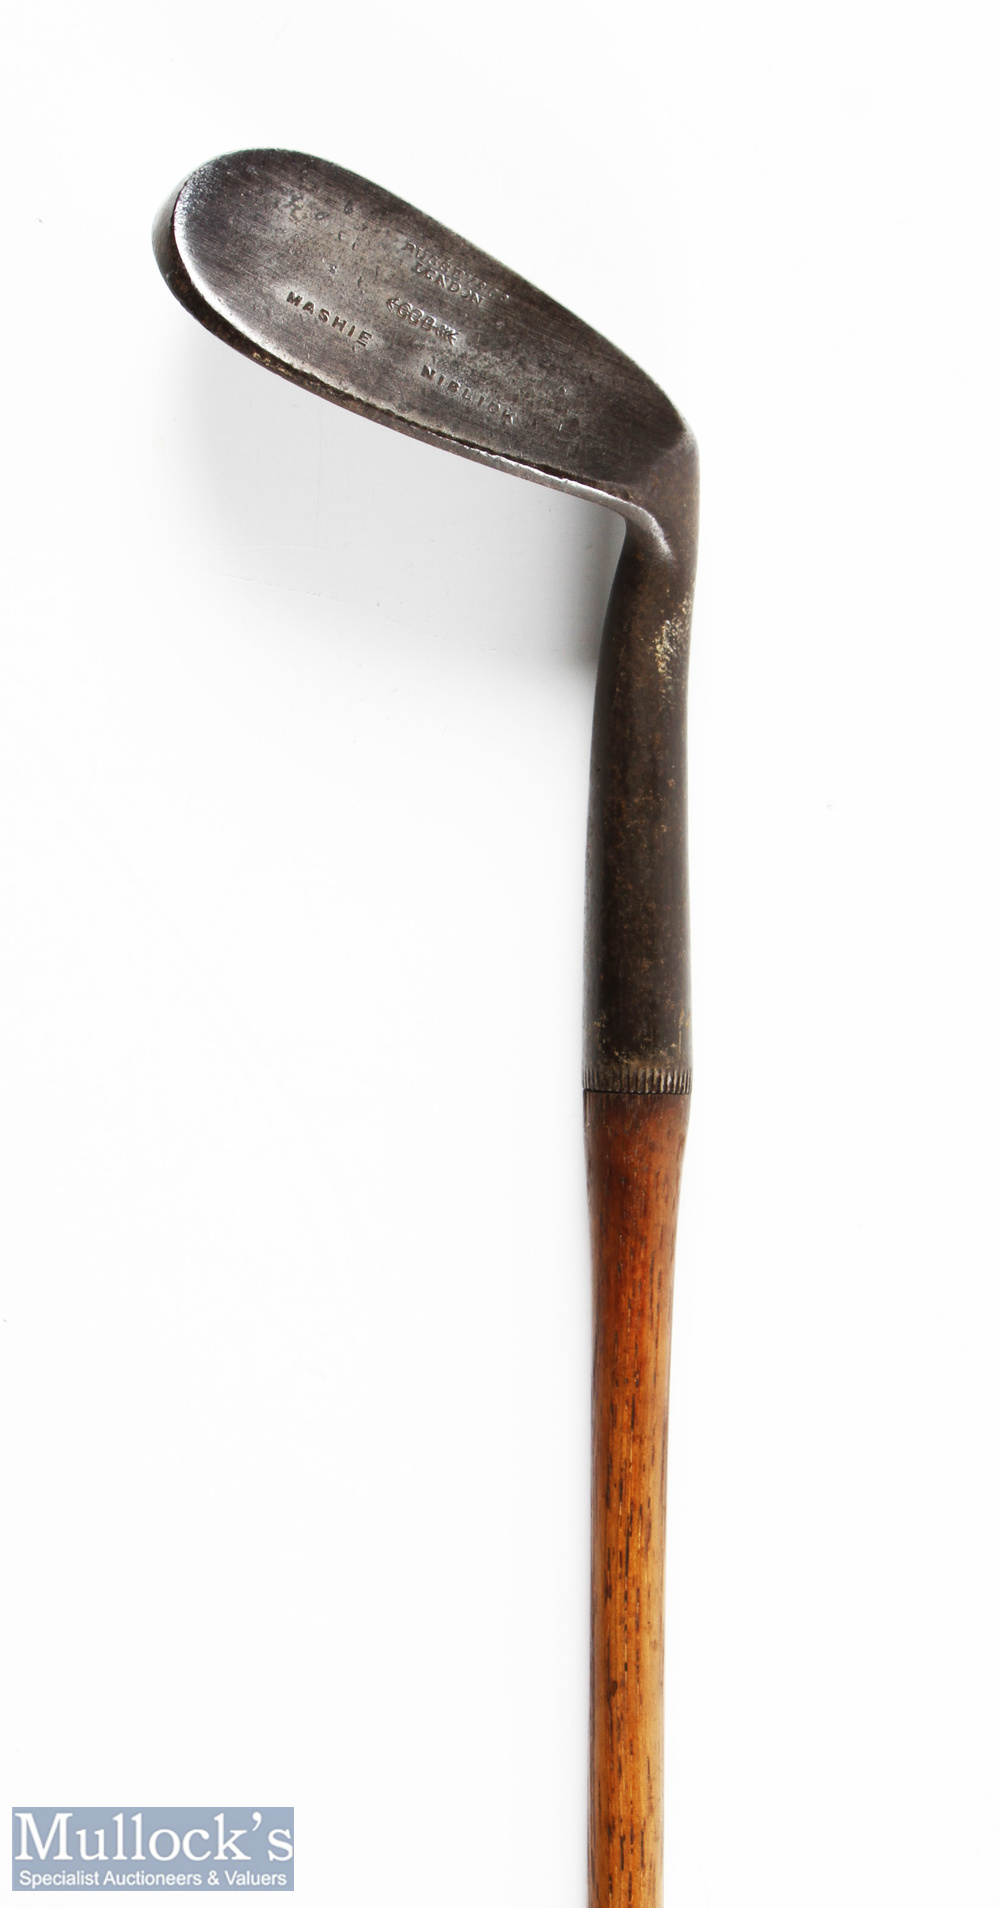 Bussey & Co London mashie niblick showing the maker's arrow cleek mark and unusual face markings,